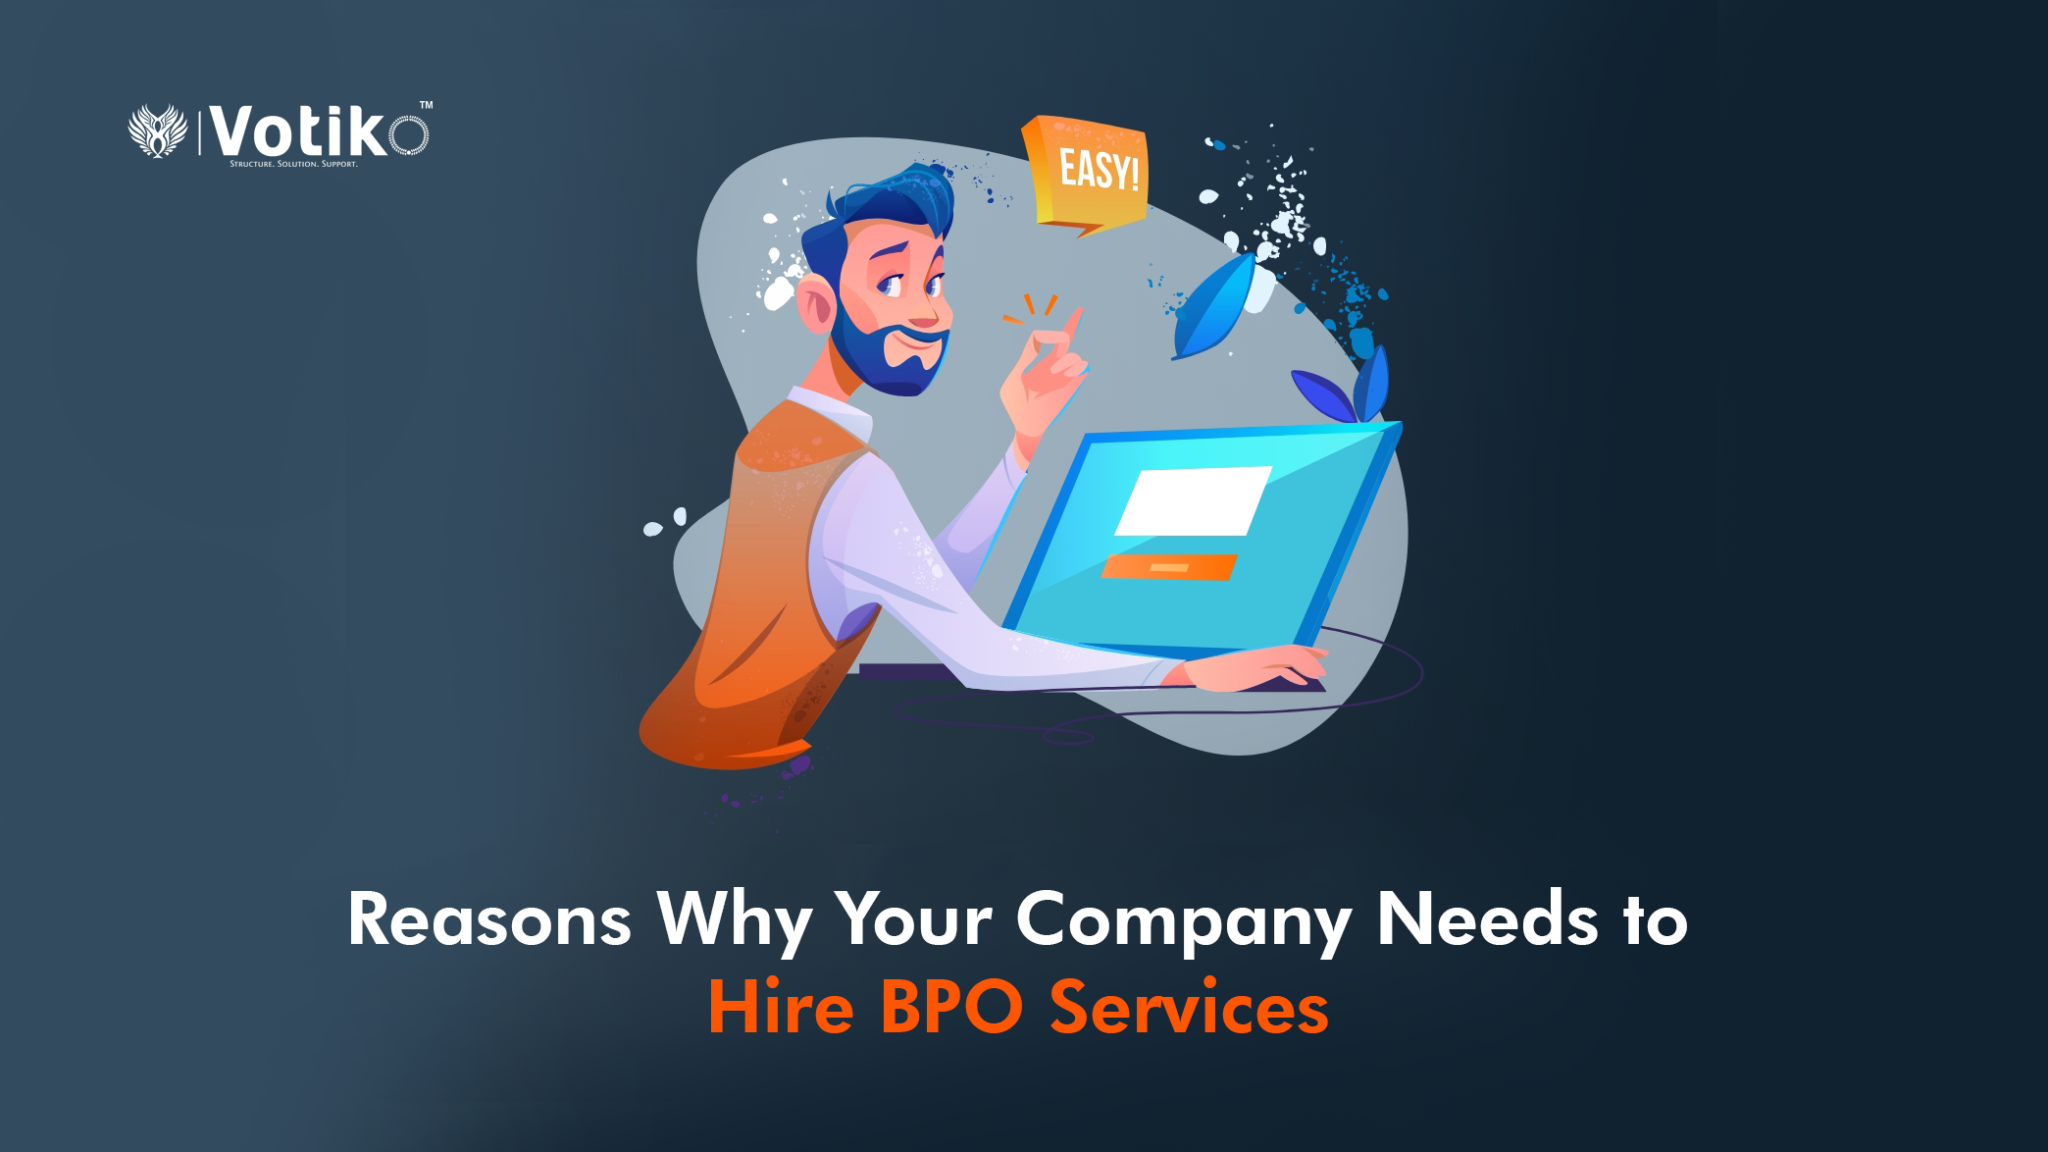 Reasons Why Your Company Needs to Hire BPO Services